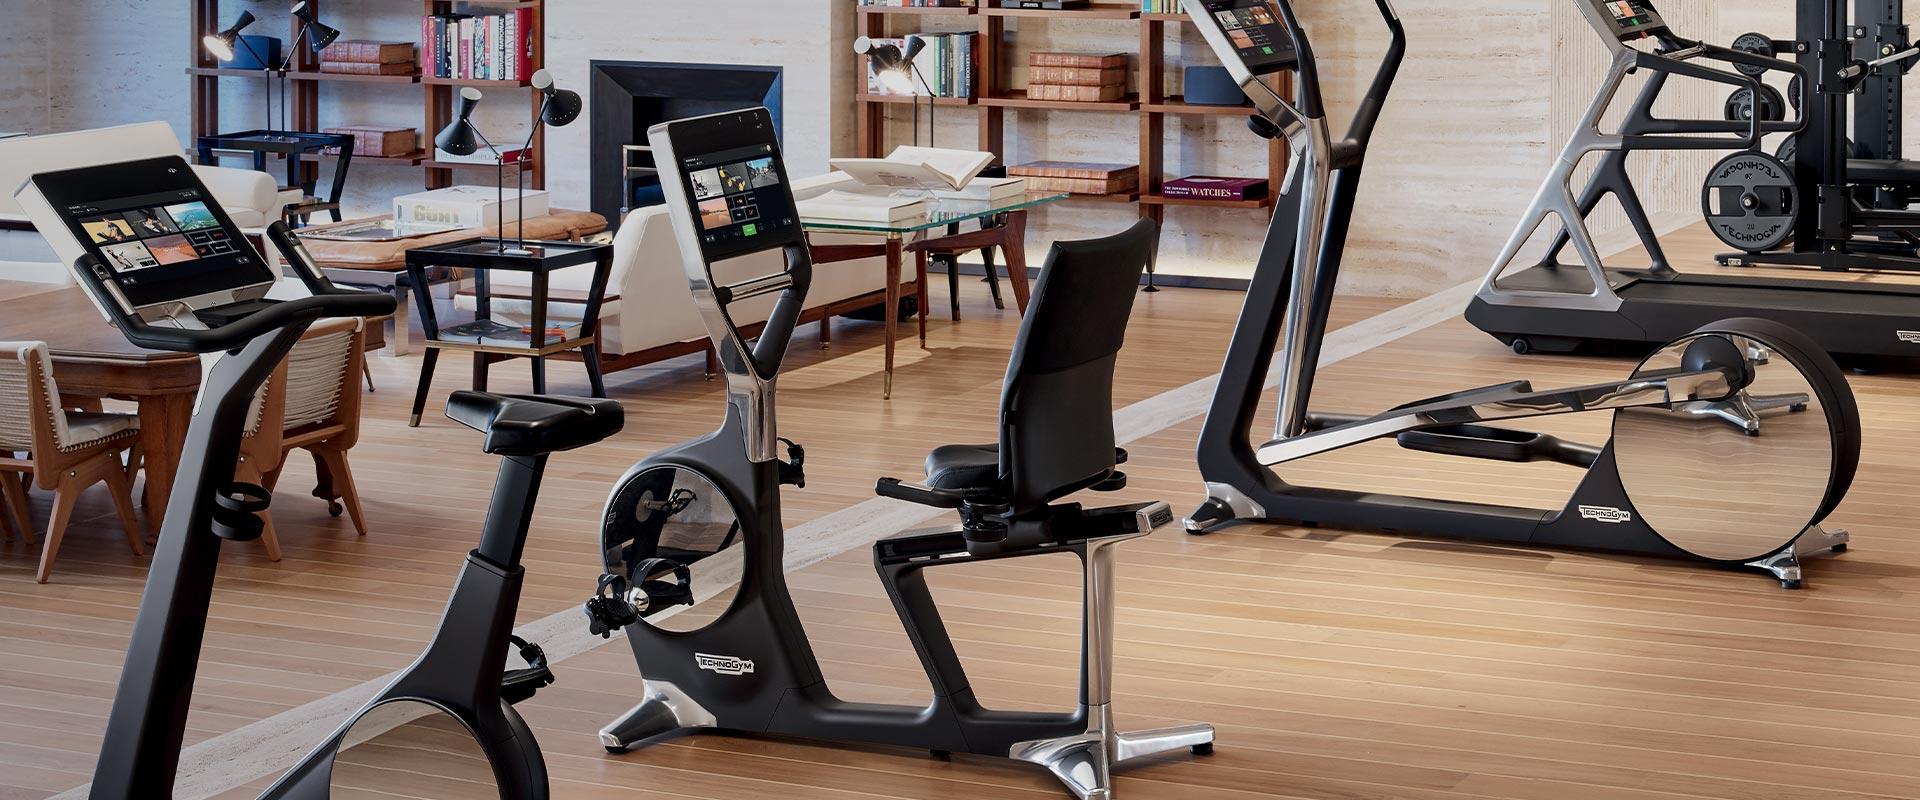 Technogym goes to the Olympics with double-digit sales growth 